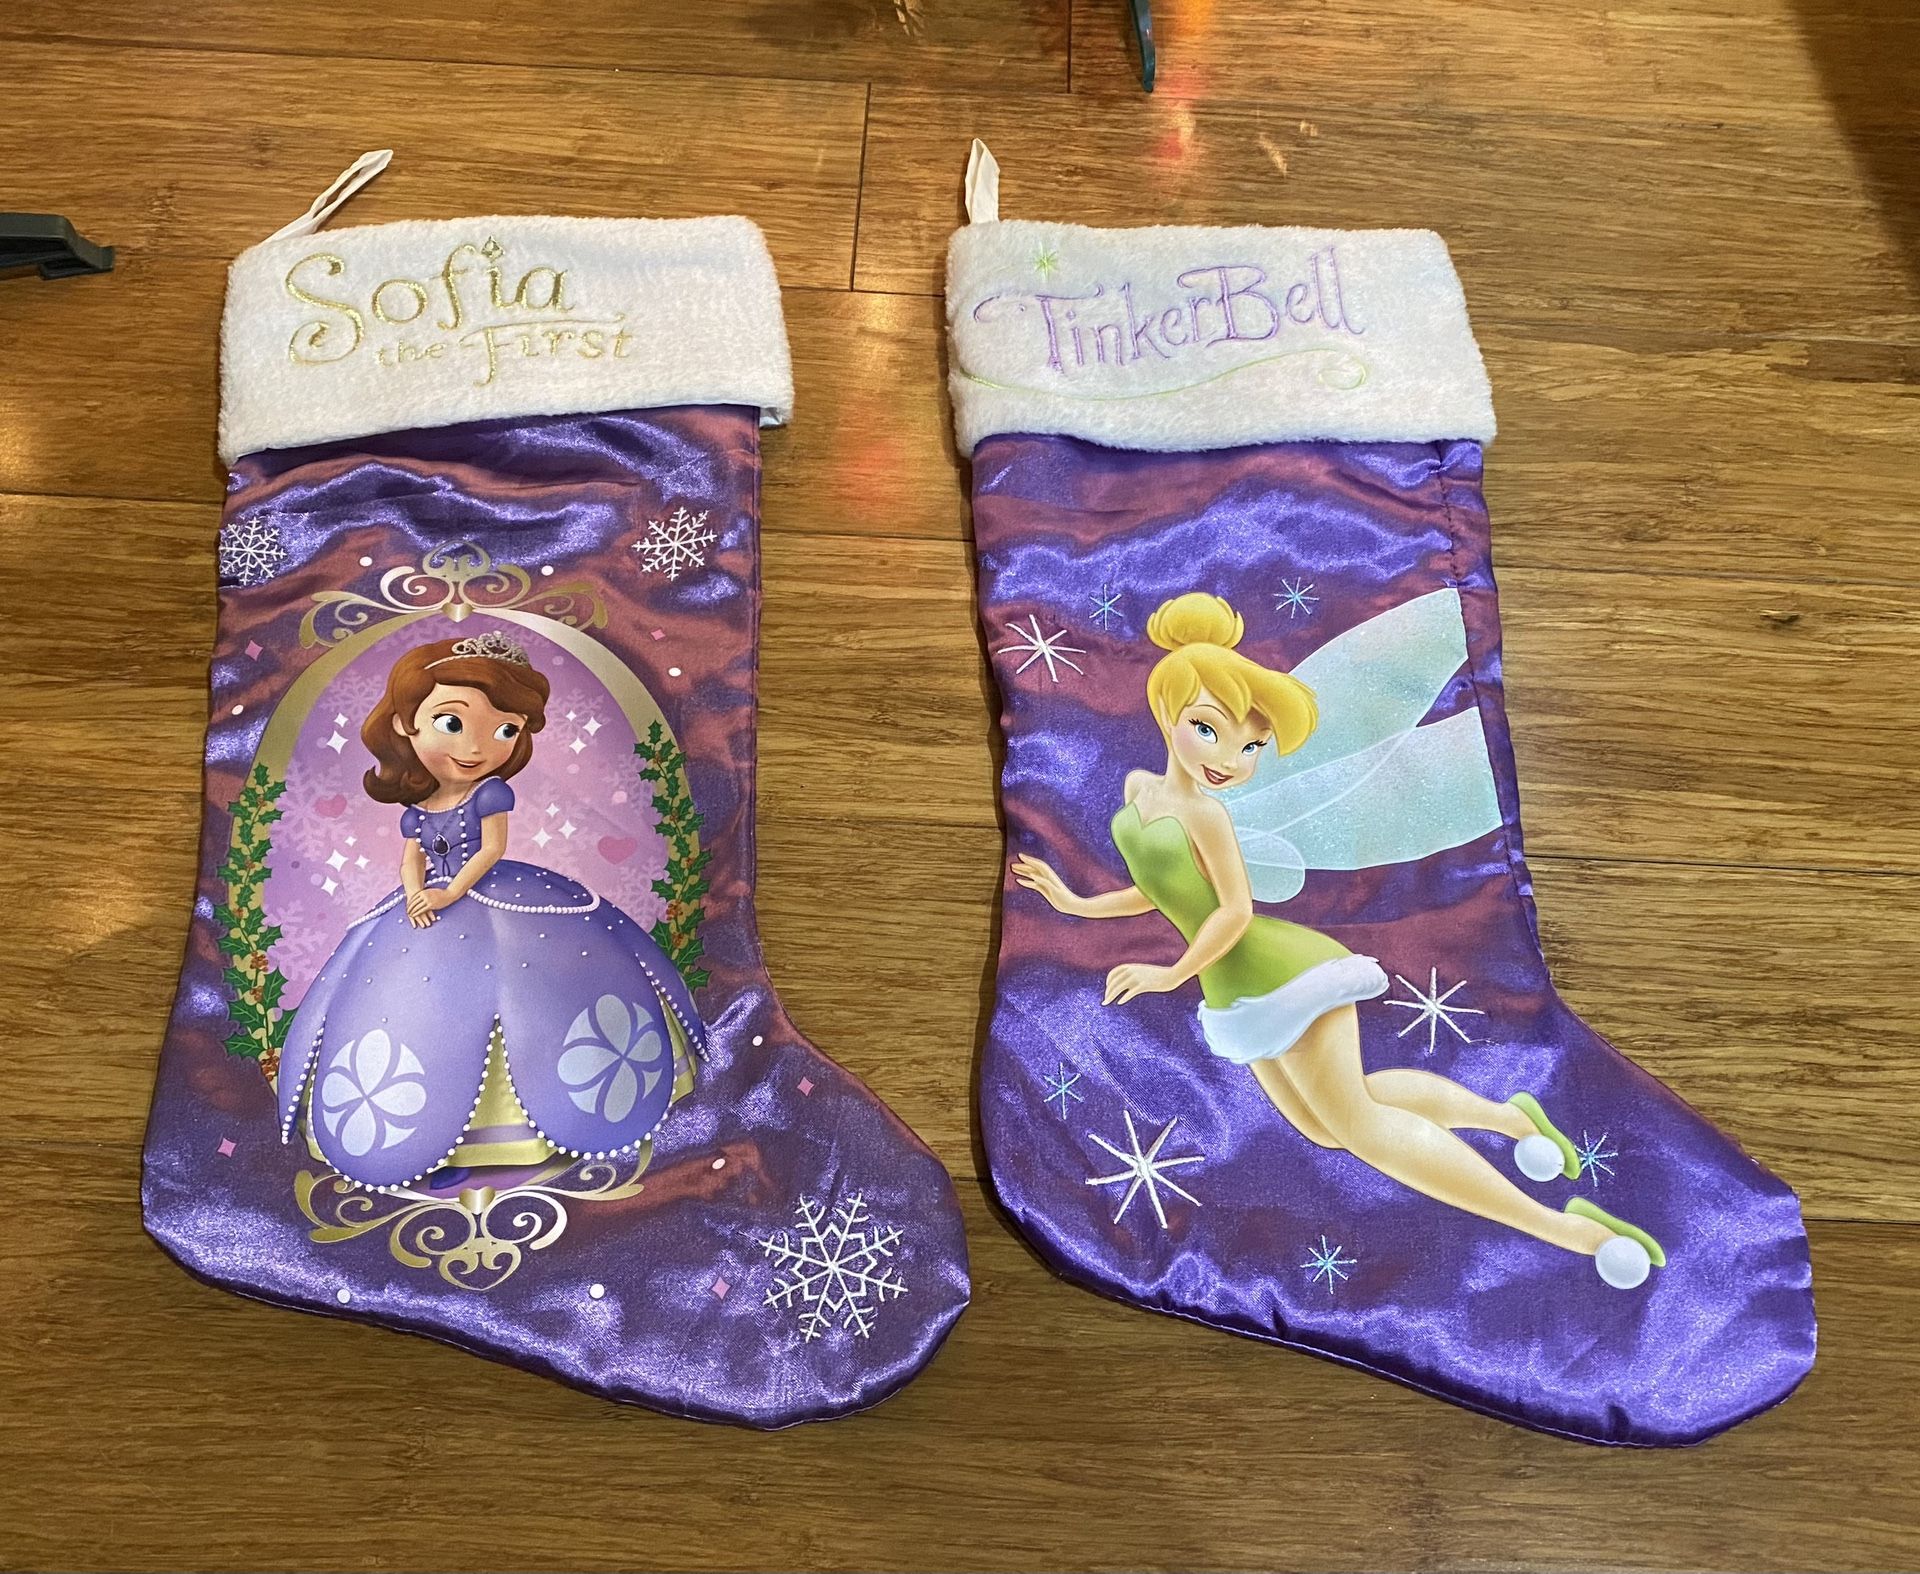 Sofia The First &TinkerBell Stockings